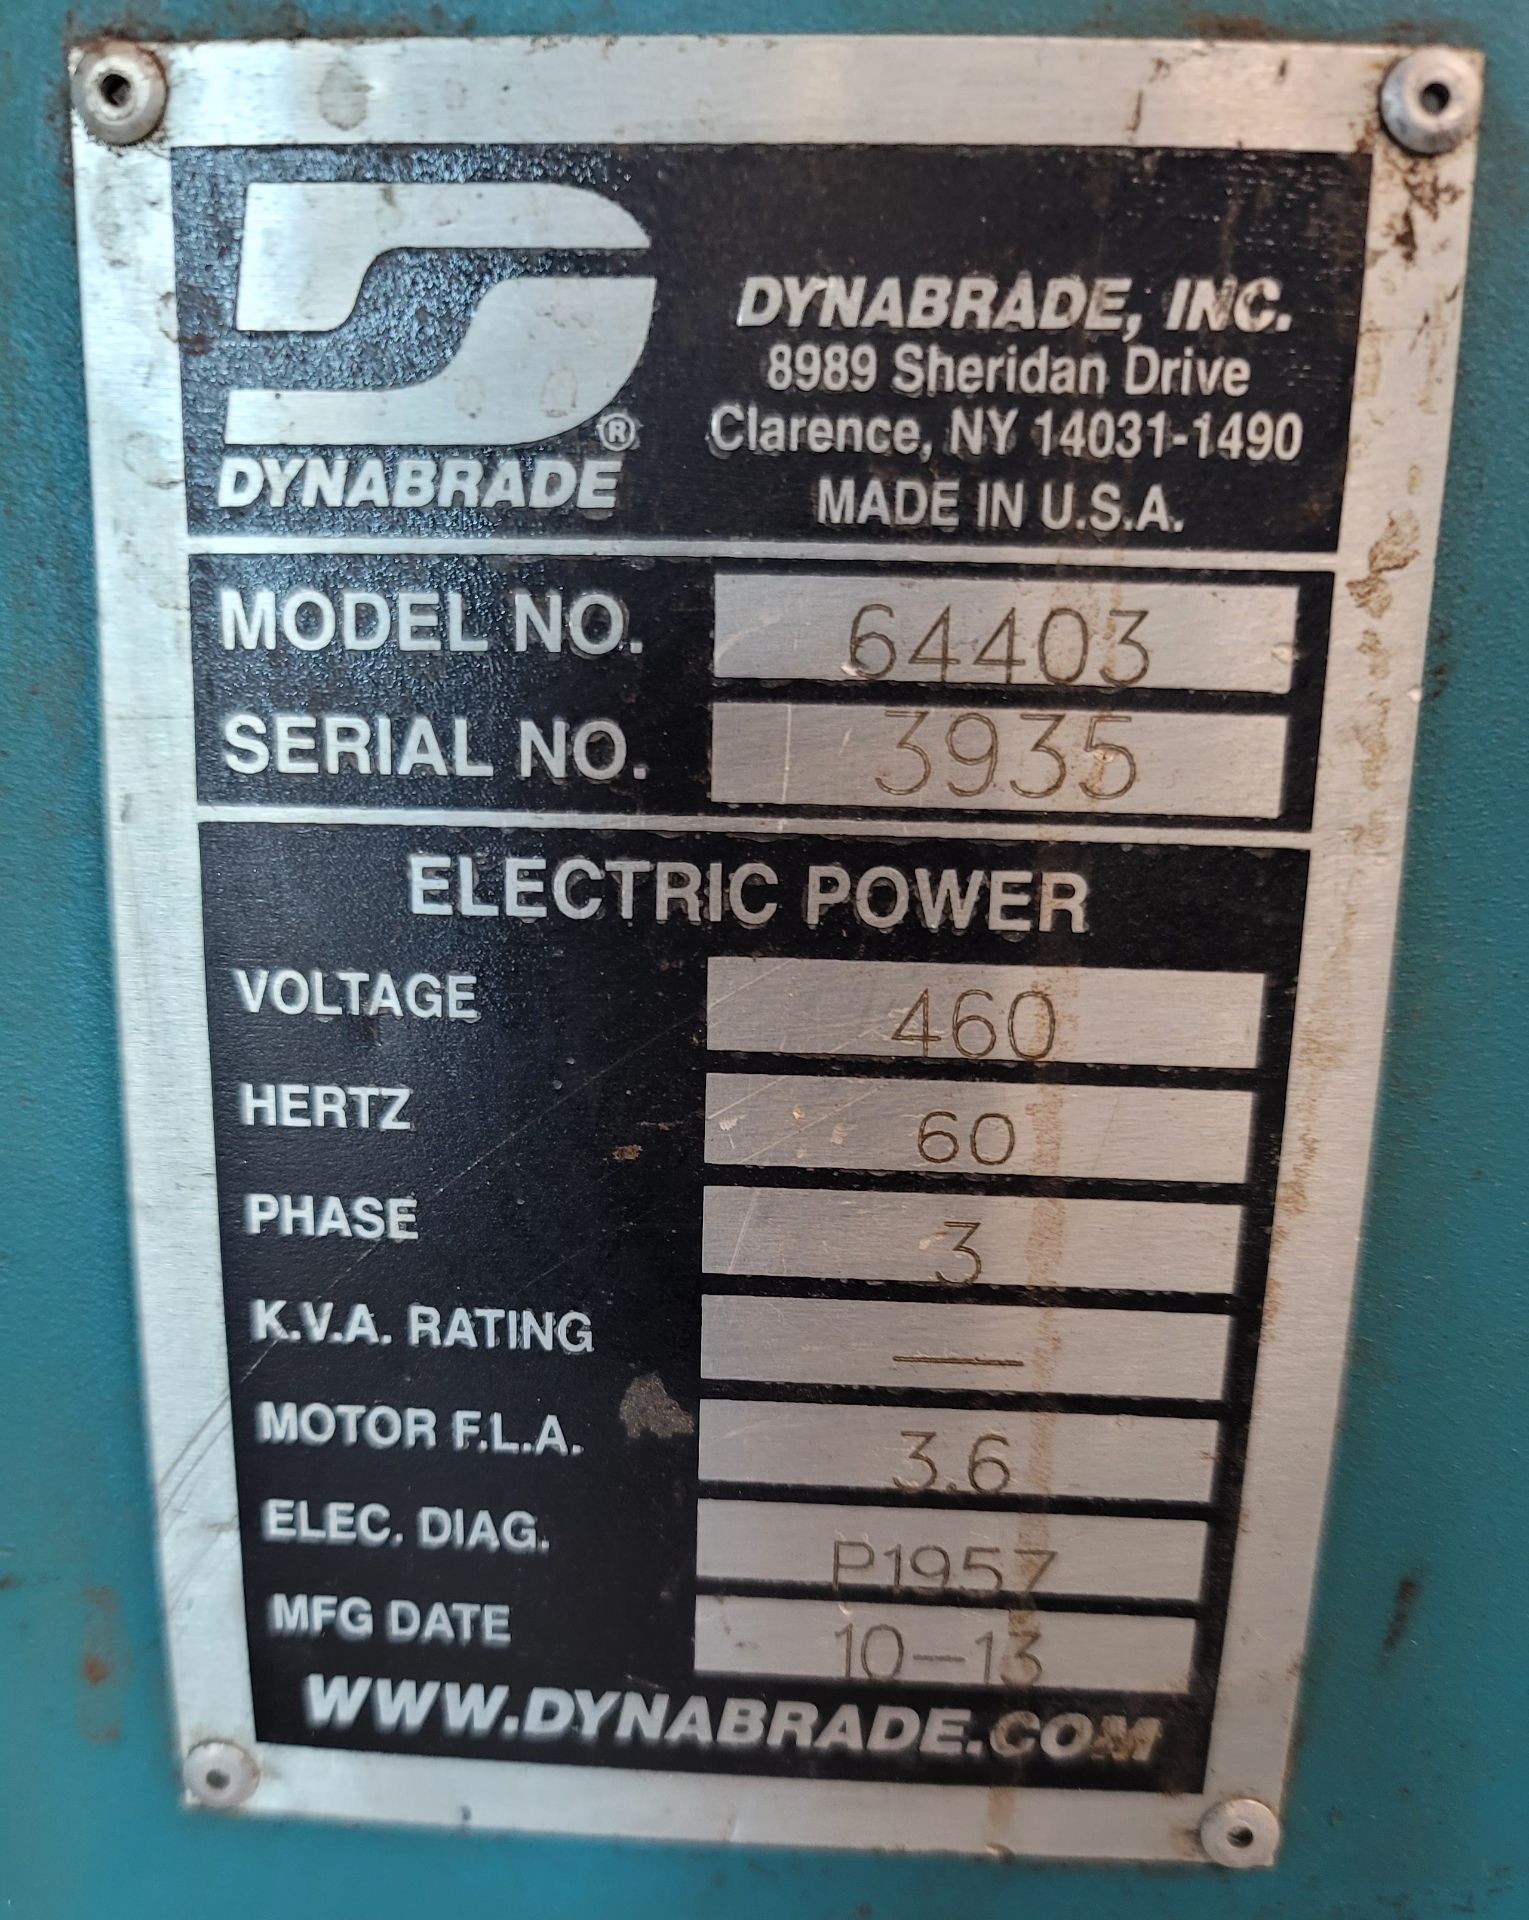 2013 DYNABRADE DOWNDRAFT TABLE, MODEL 64403, 460V, 3 PHASE, S/N 3935, ON CASTERS - Image 3 of 3